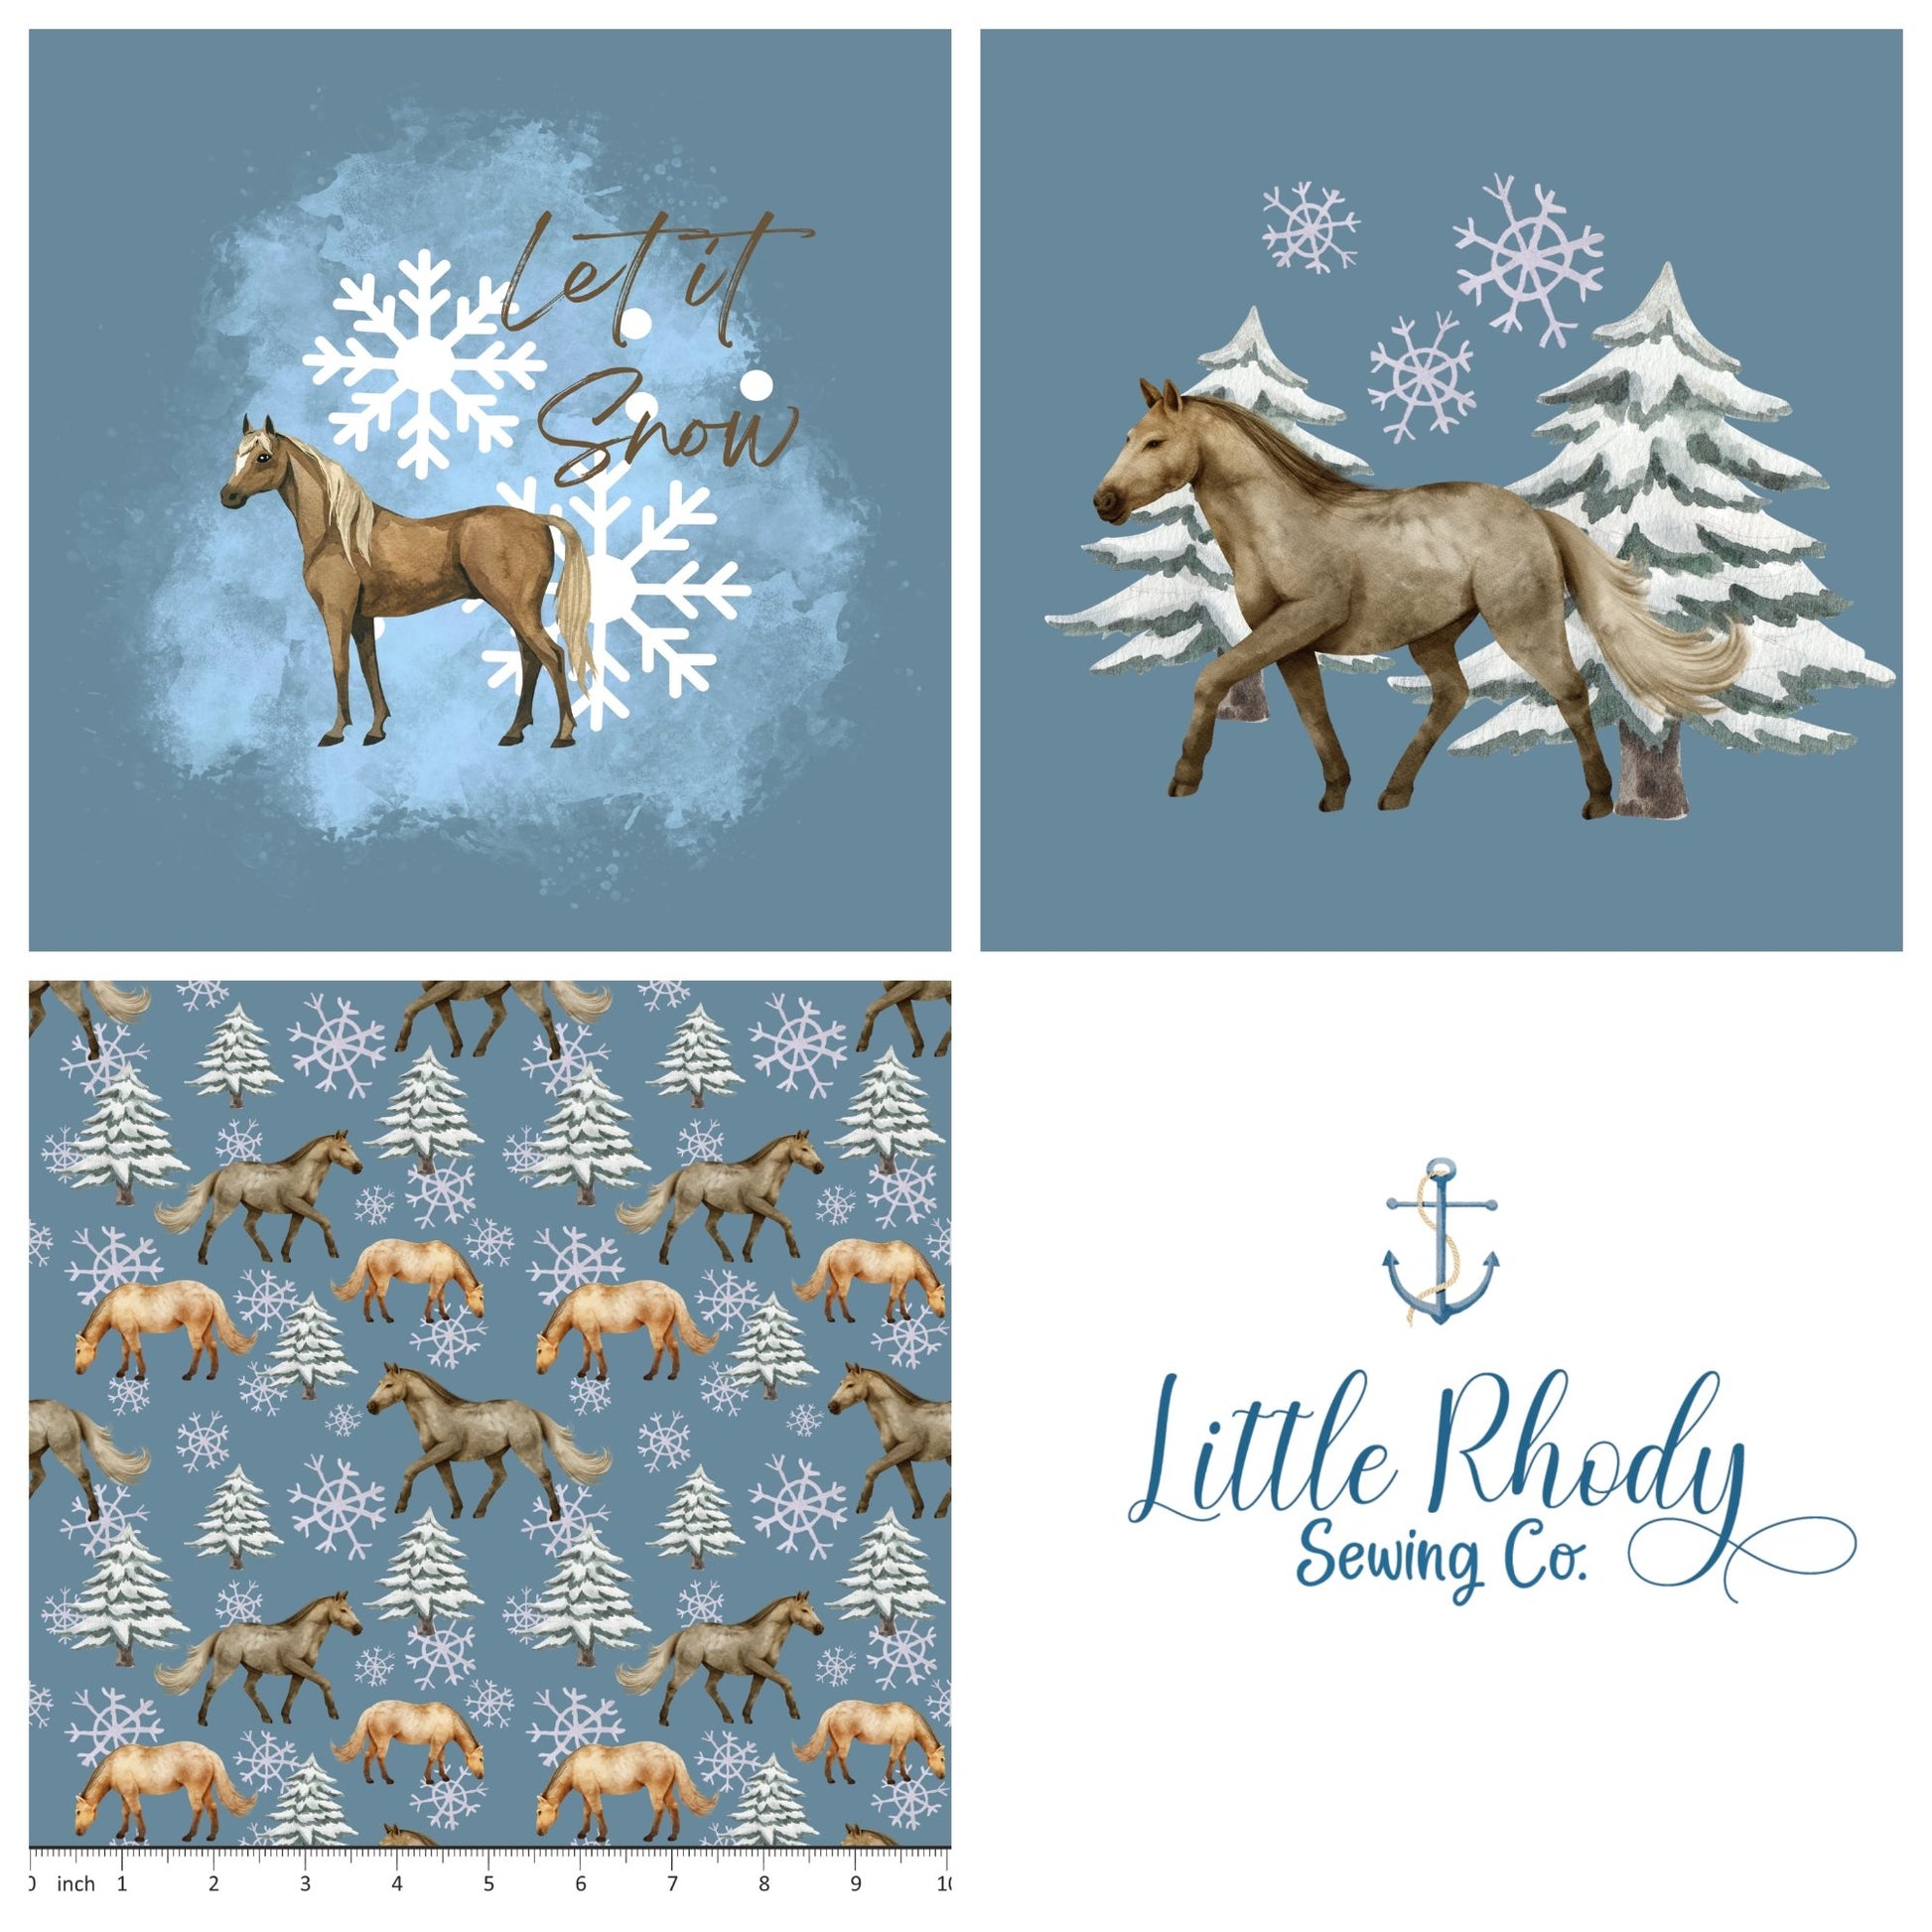 Horses and Snowflakes - 3 Panel Set - 3 Panel Fabric Rapport - Little Rhody Sewing Co.